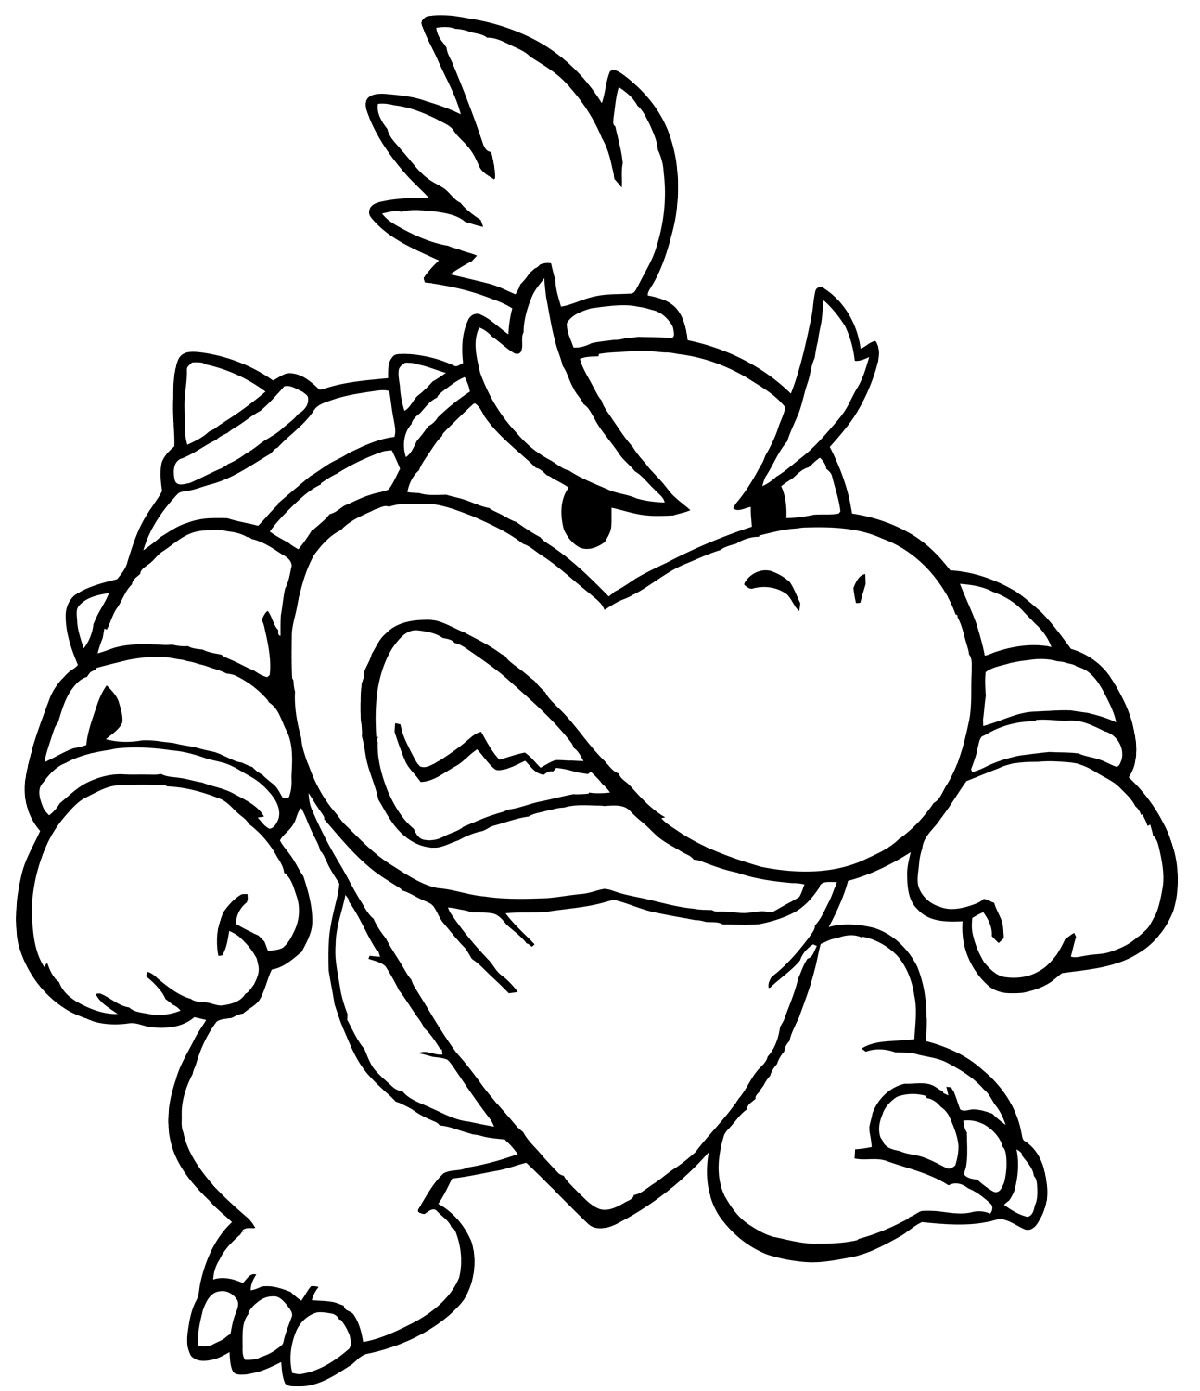 Bowser Coloring Page And Mario Suitable For Students | K5 Worksheets à Coloriage Mario Bowser